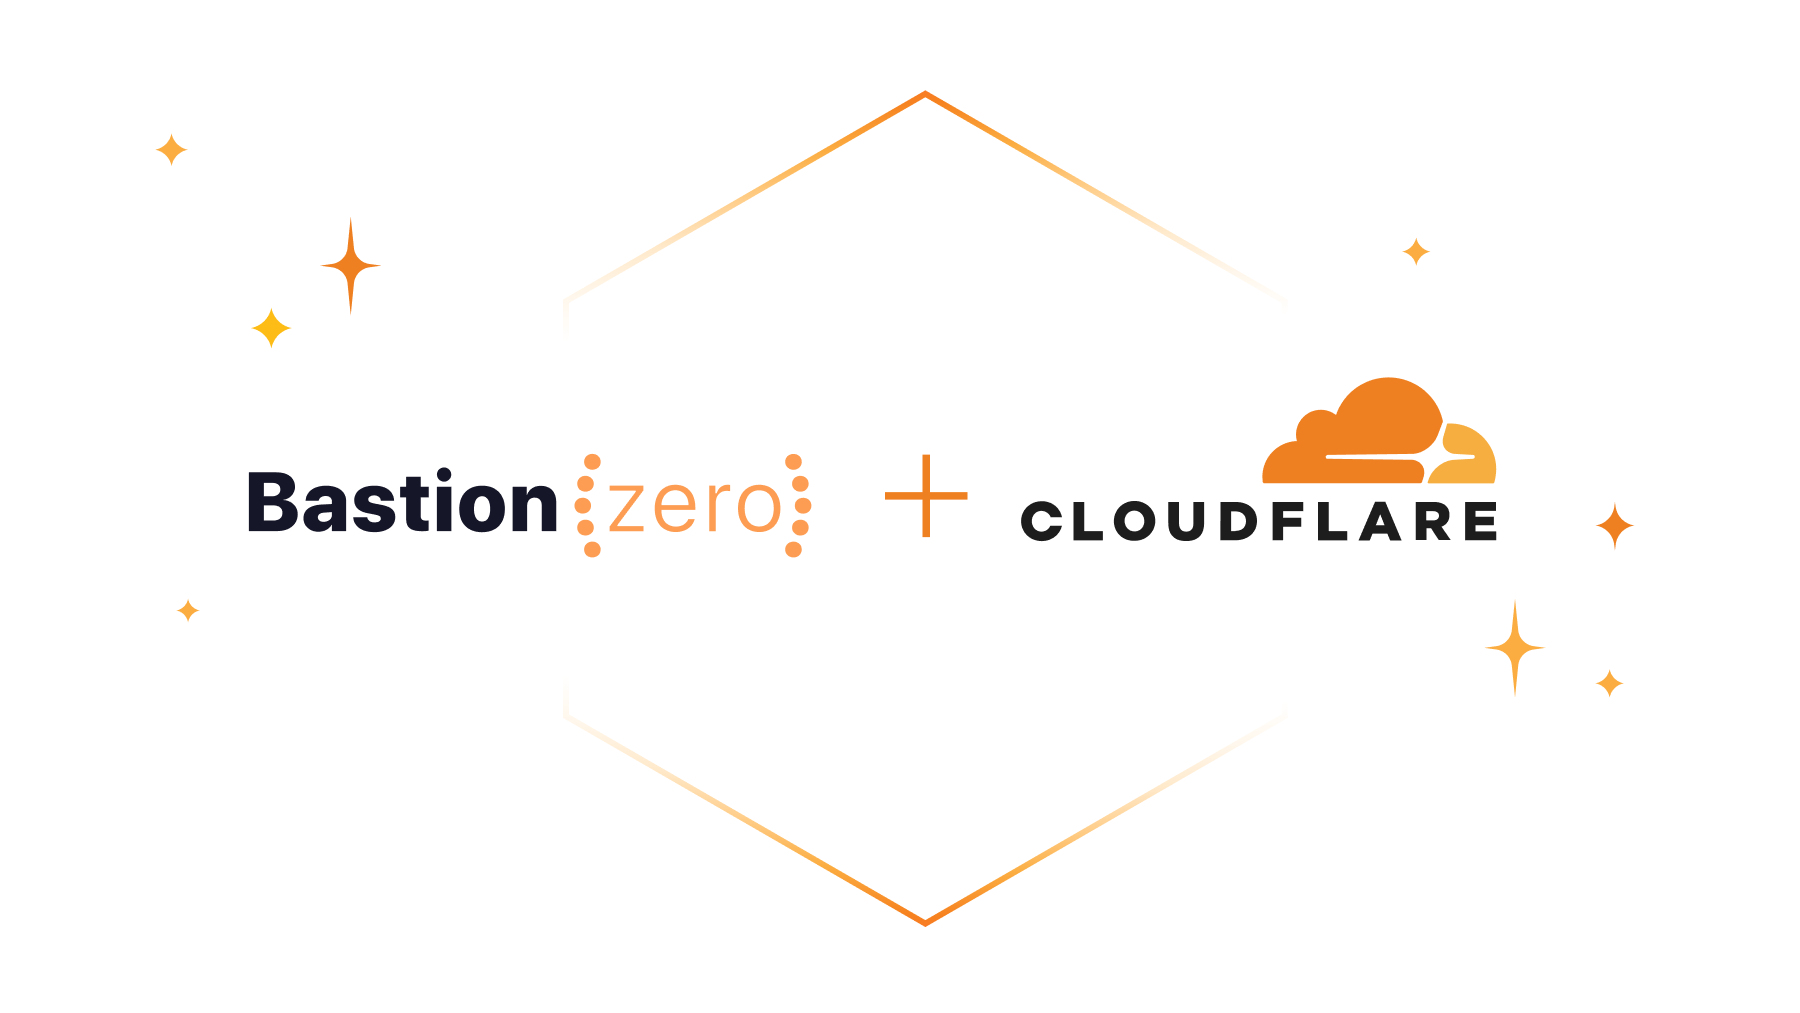 Cloudflare acquires BastionZero to extend Zero Trust access to IT infrastructure